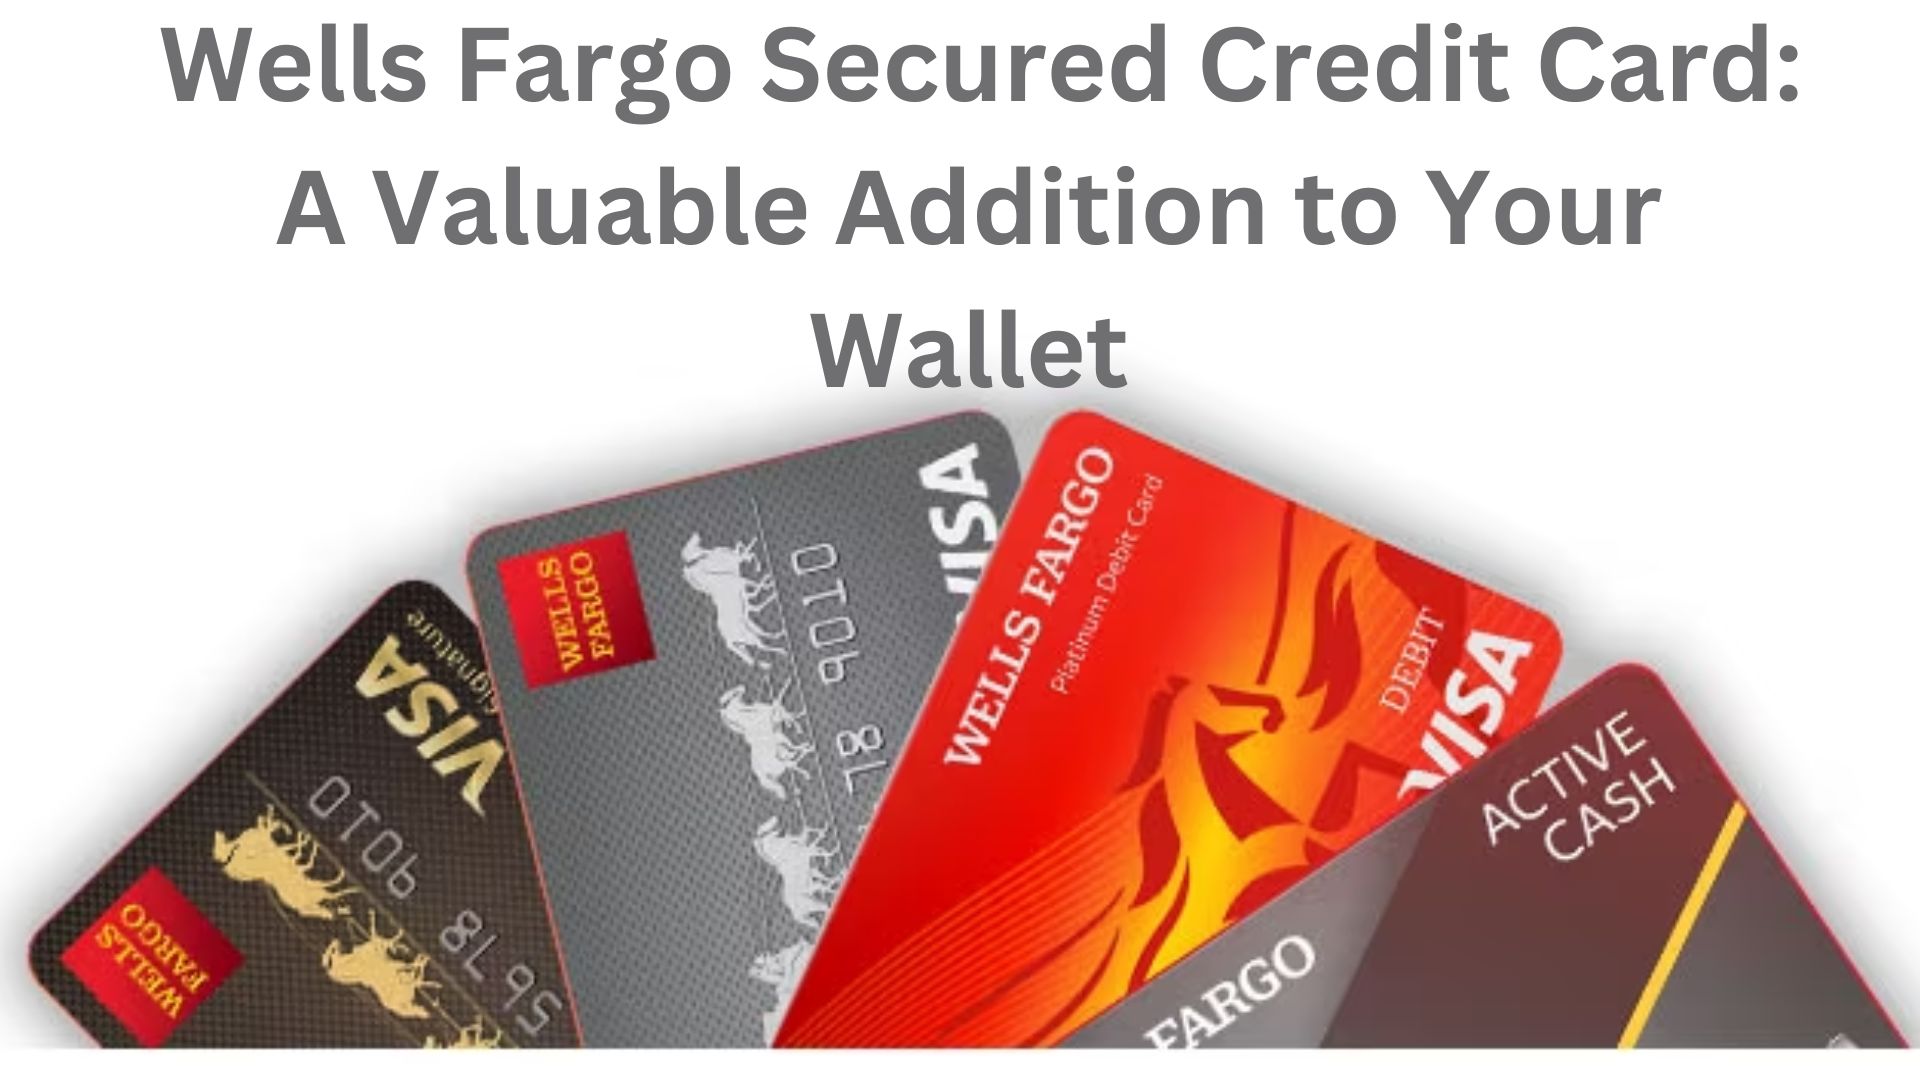 How To Request Wells Fargo To Upgrade Secured Card To Unsecured